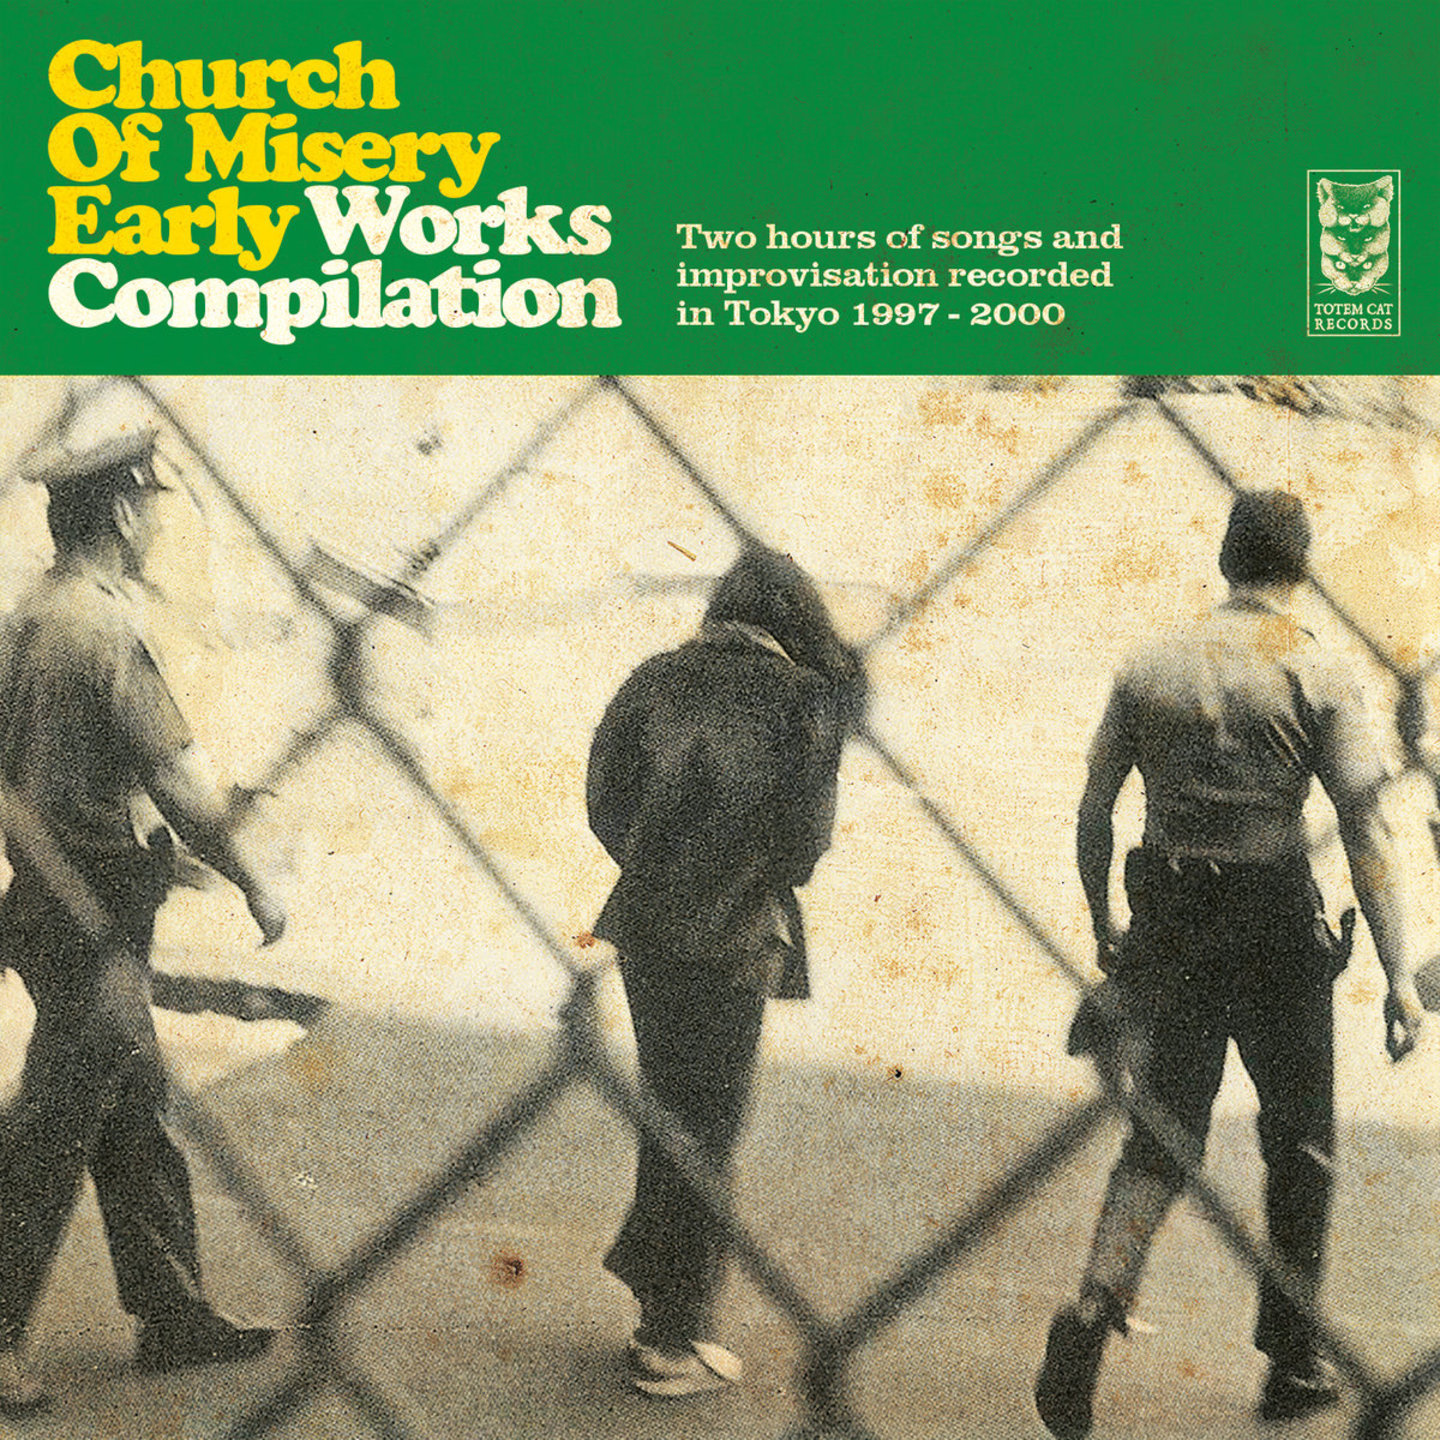 CHURCH OF MISERY - Early Works Compilation boxset 2xLP (Smoky Transparent Beer/Yellow/Green vinyl)